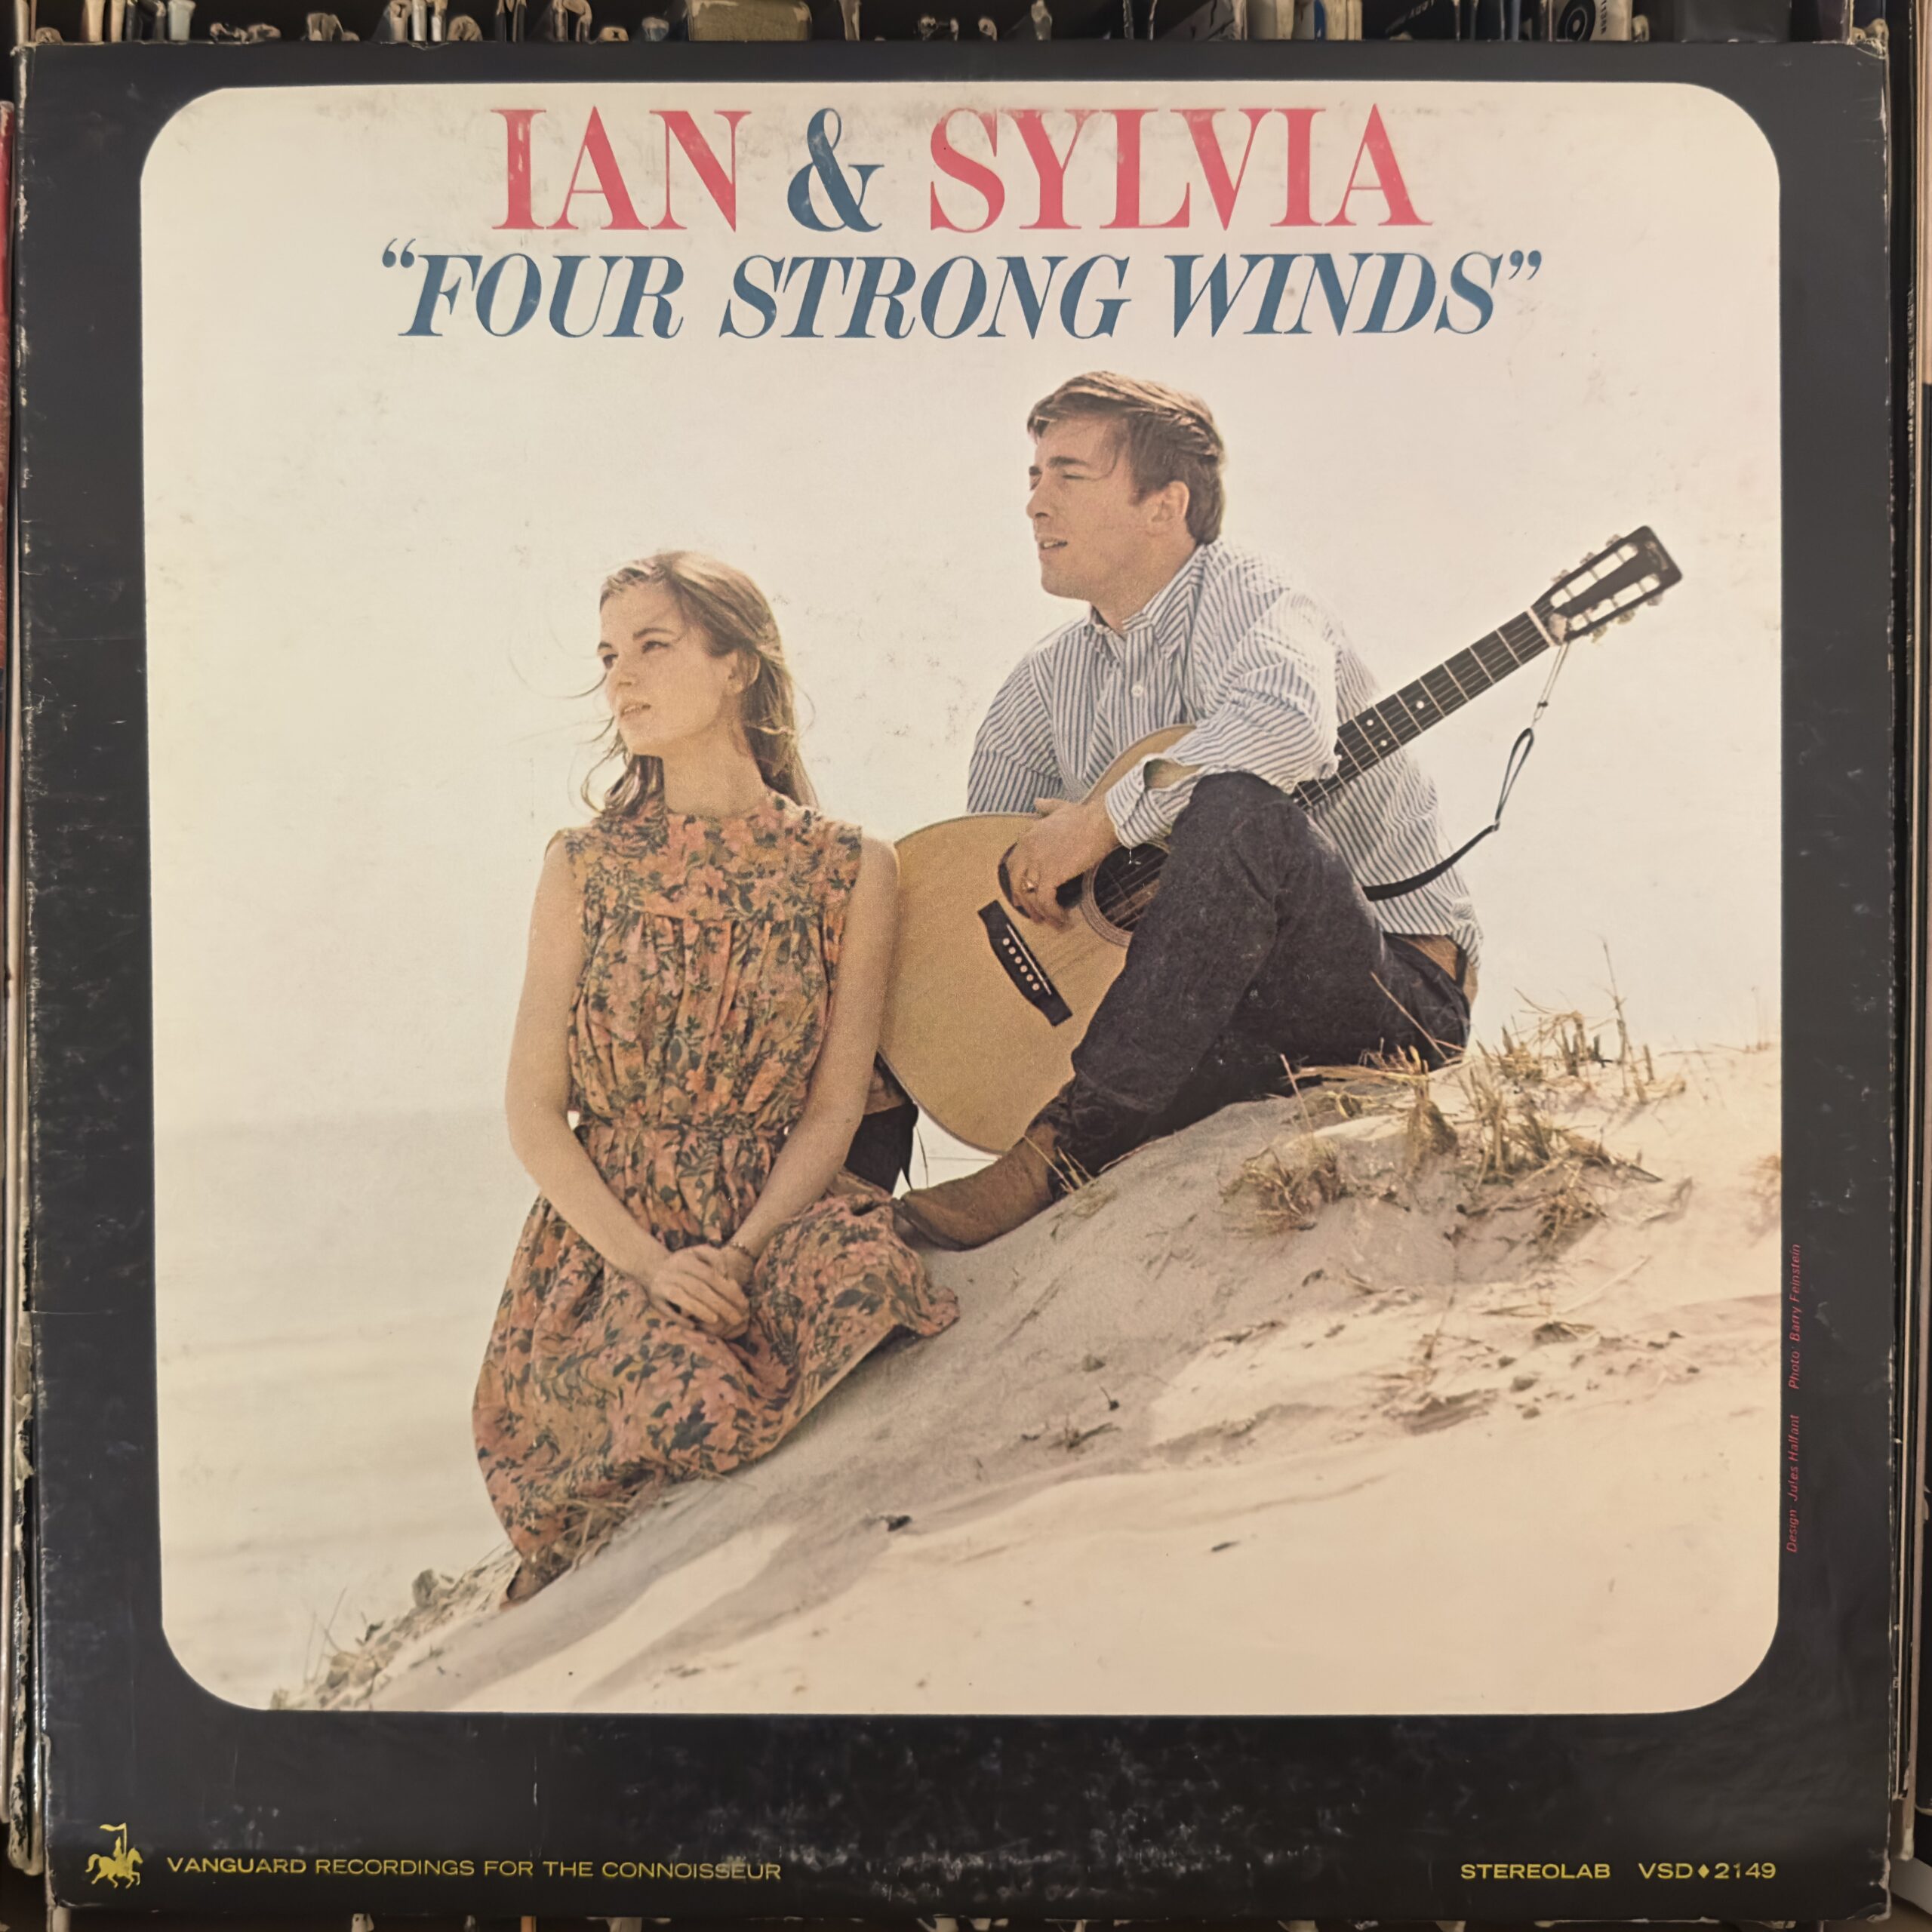 Four Strong Winds by Ian & Sylvia